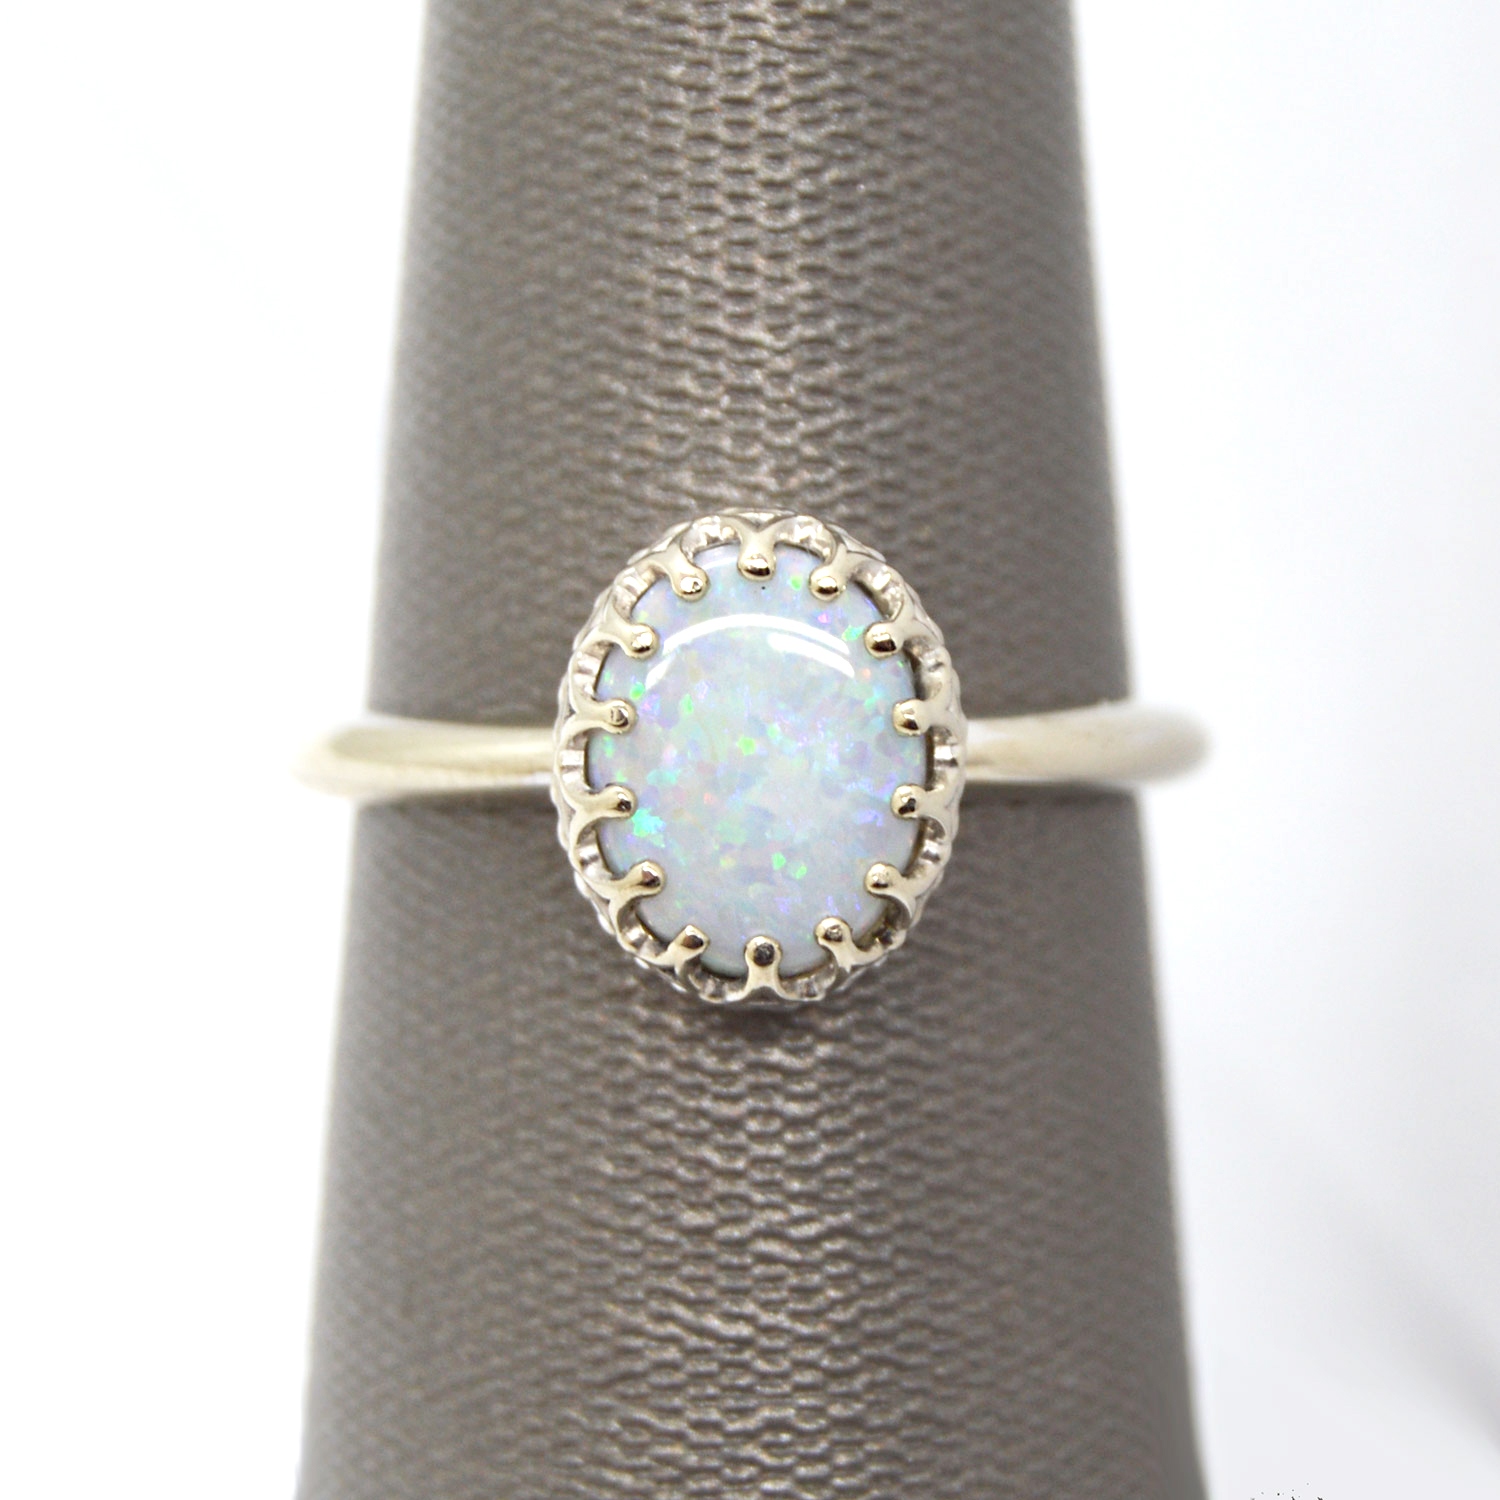 Risikabel At regere ned Opal ring in 14Kt White Gold - Morgan's Treasure